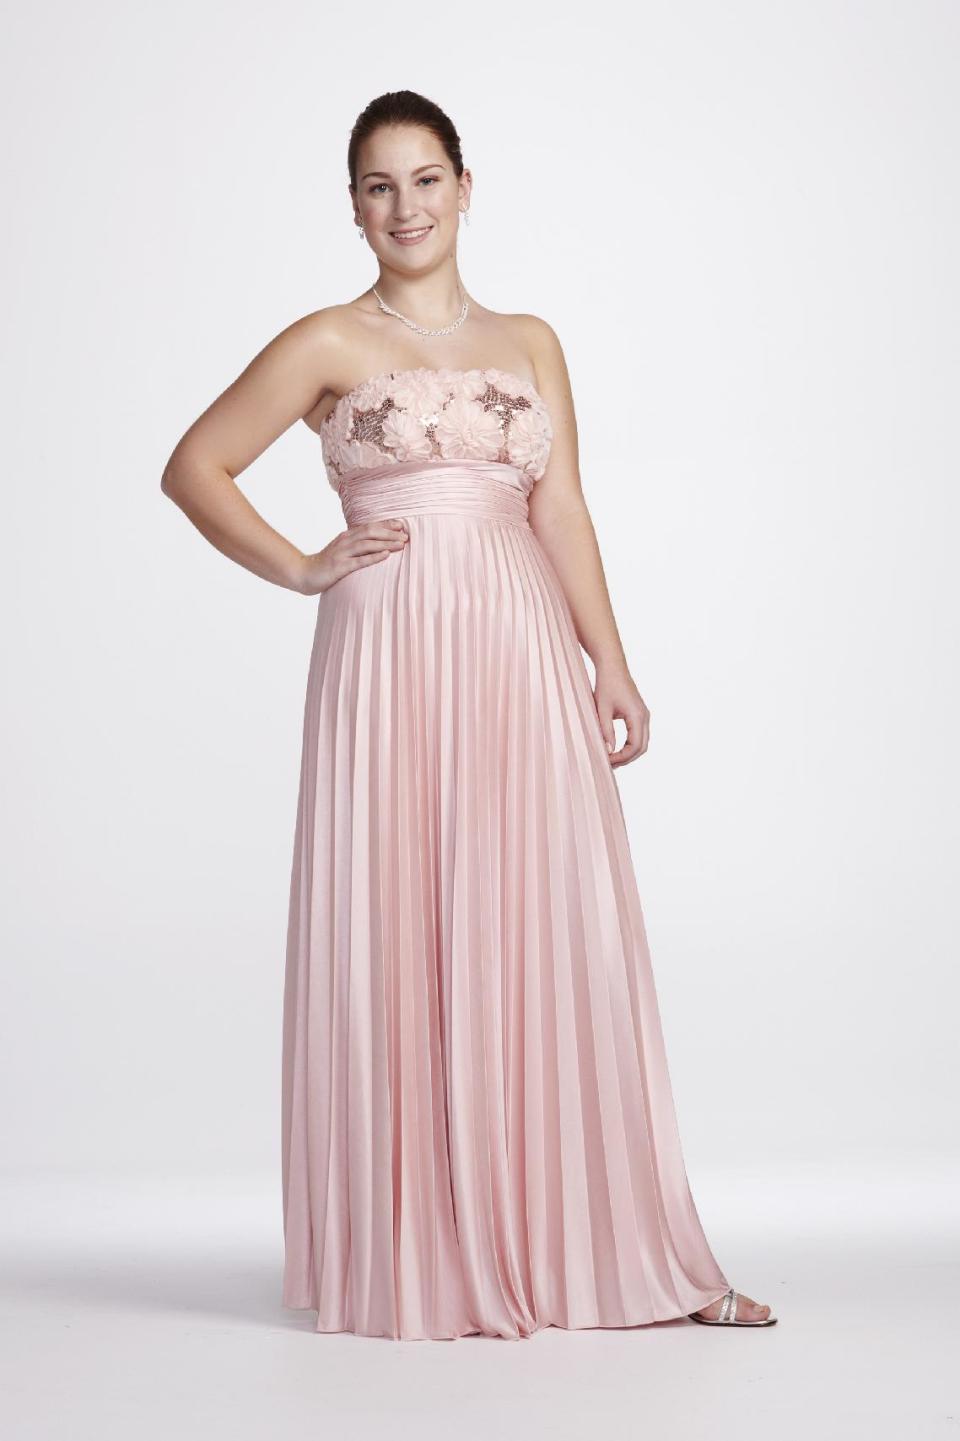 This undated image released by David's Bridal shows a popular prom gown design offered at David's Bridal. Clothes shopping for plus-size teens can be frustrating in general, but shopping for a dream prom dress can be a tear-inducing, hair-pulling morass of bad design and few options _ especially for girls who want a dress that hugs the body instead of tenting it. (AP Photo/David's Bridal)